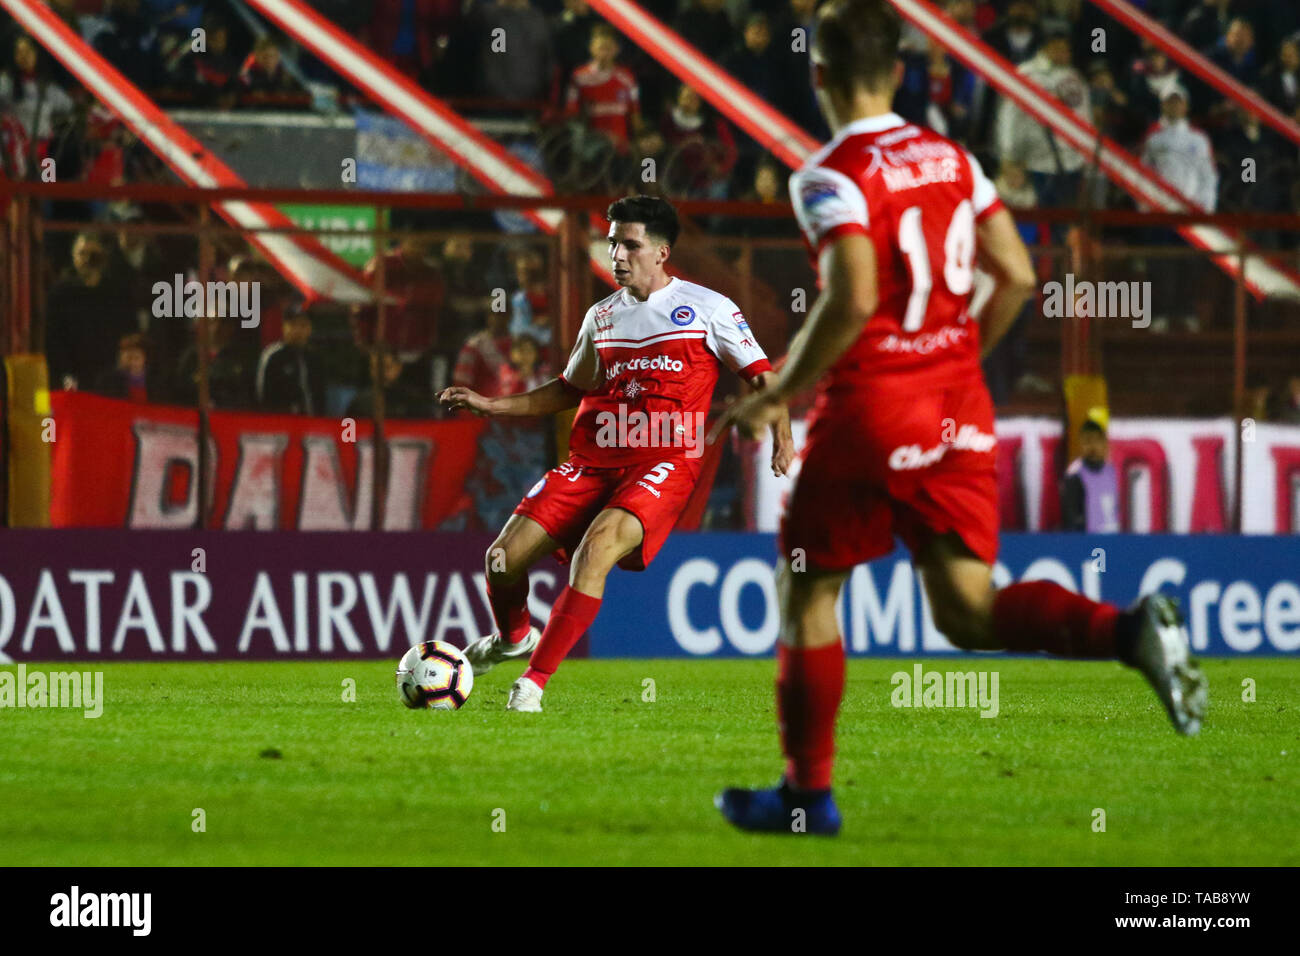 BUENOS AIRES, 23.05.2019: Francis Mac Allister during the match between Argentinos Juniors and Deportes Tolima for the 2nd round of Conmebol Sudameric Stock Photo